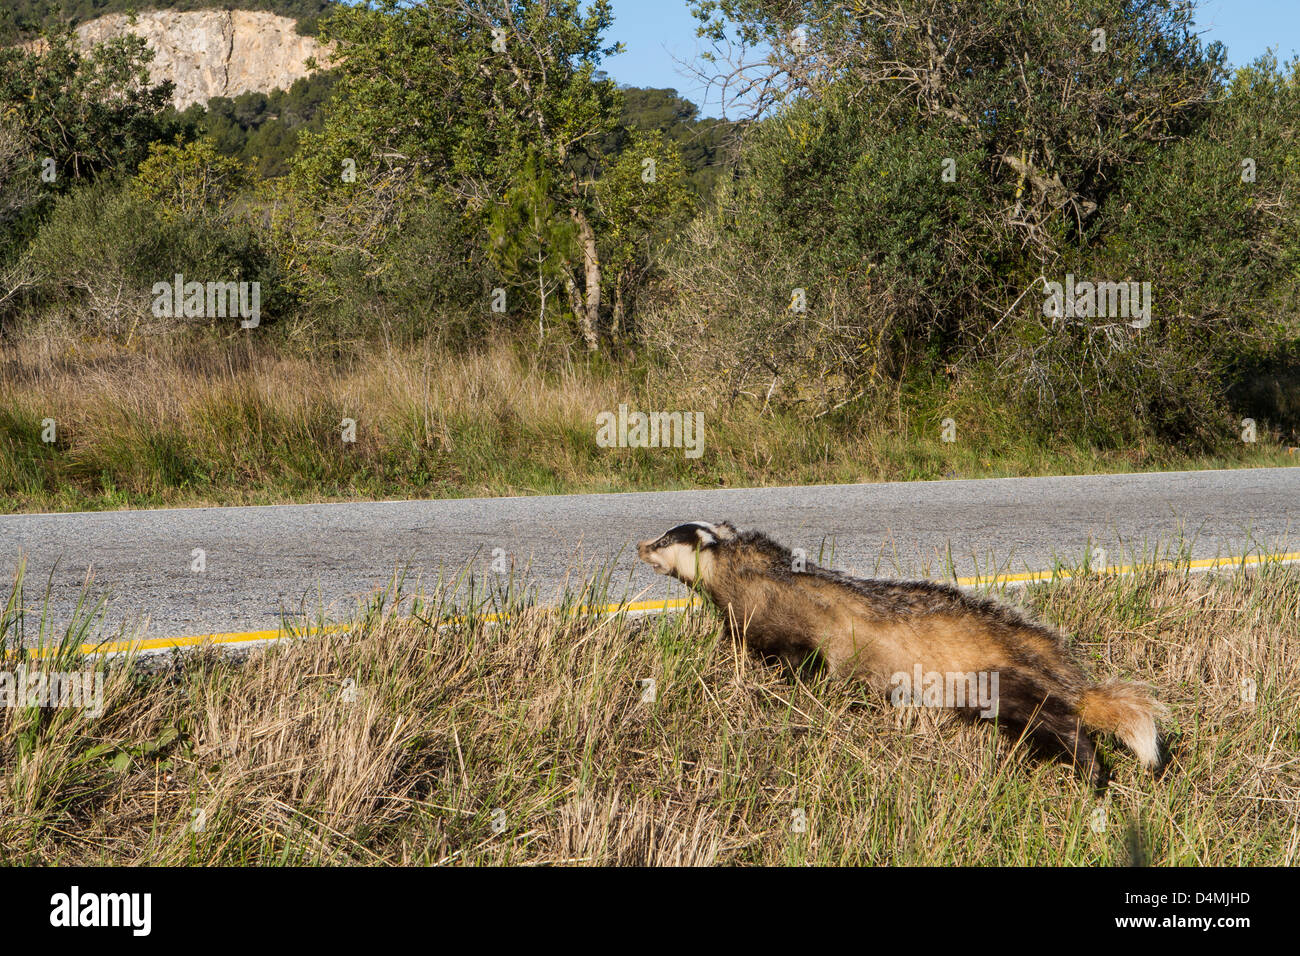 dead badger on road killed by car Stock Photo